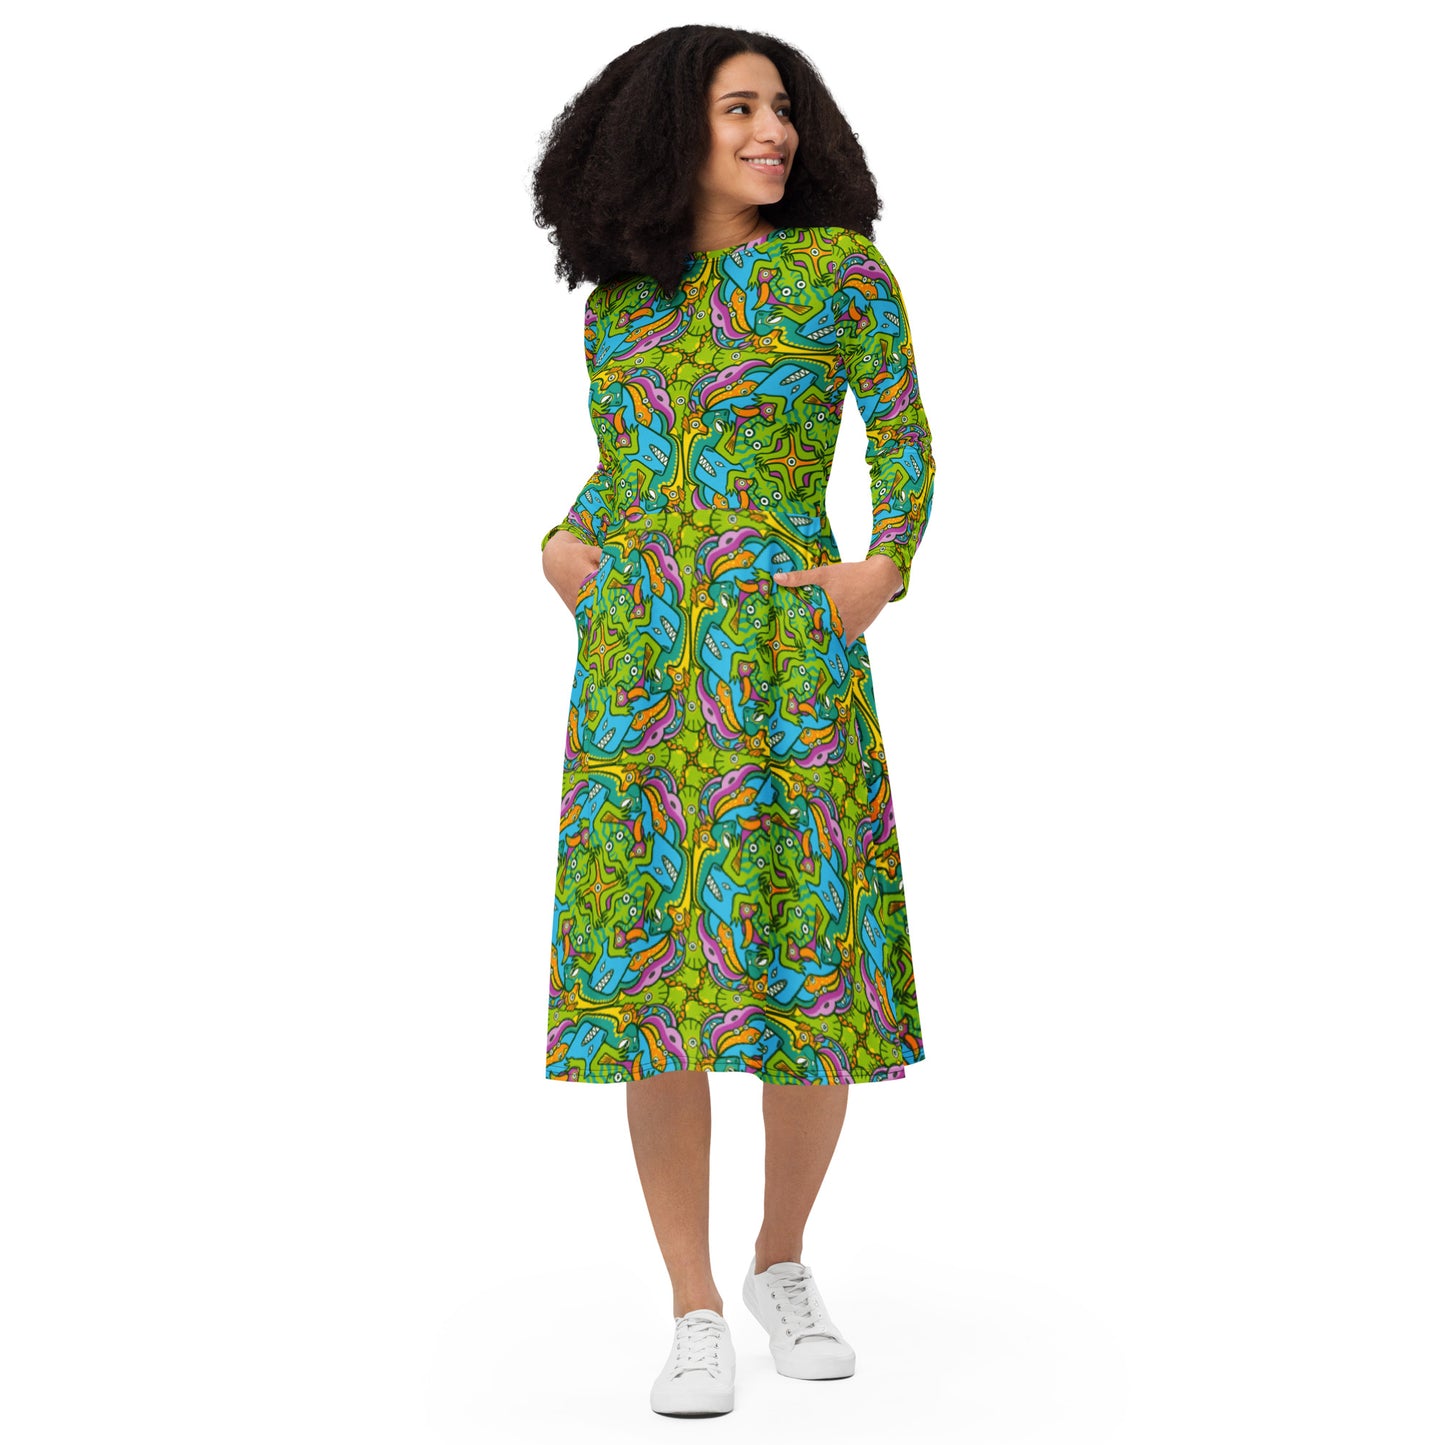 To keep calm and doodle is more than just doodling All-over print long sleeve midi dress. Front view